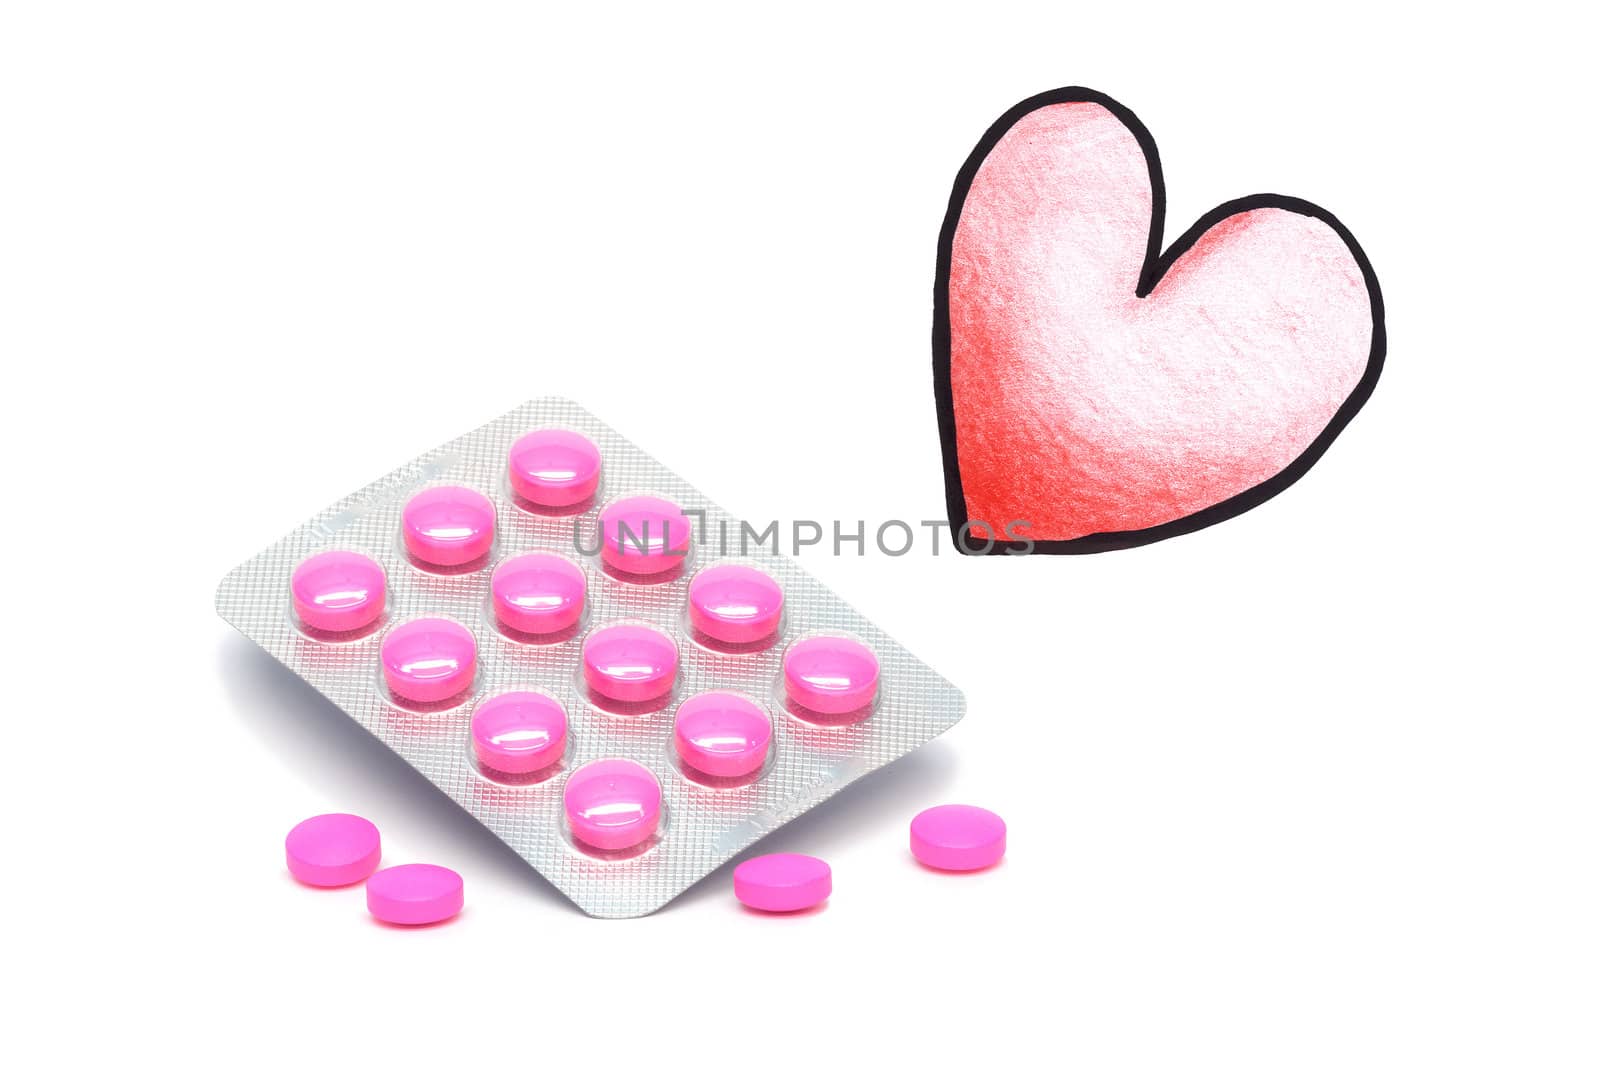 Drugs and illustrated heart on a white background by LiborF